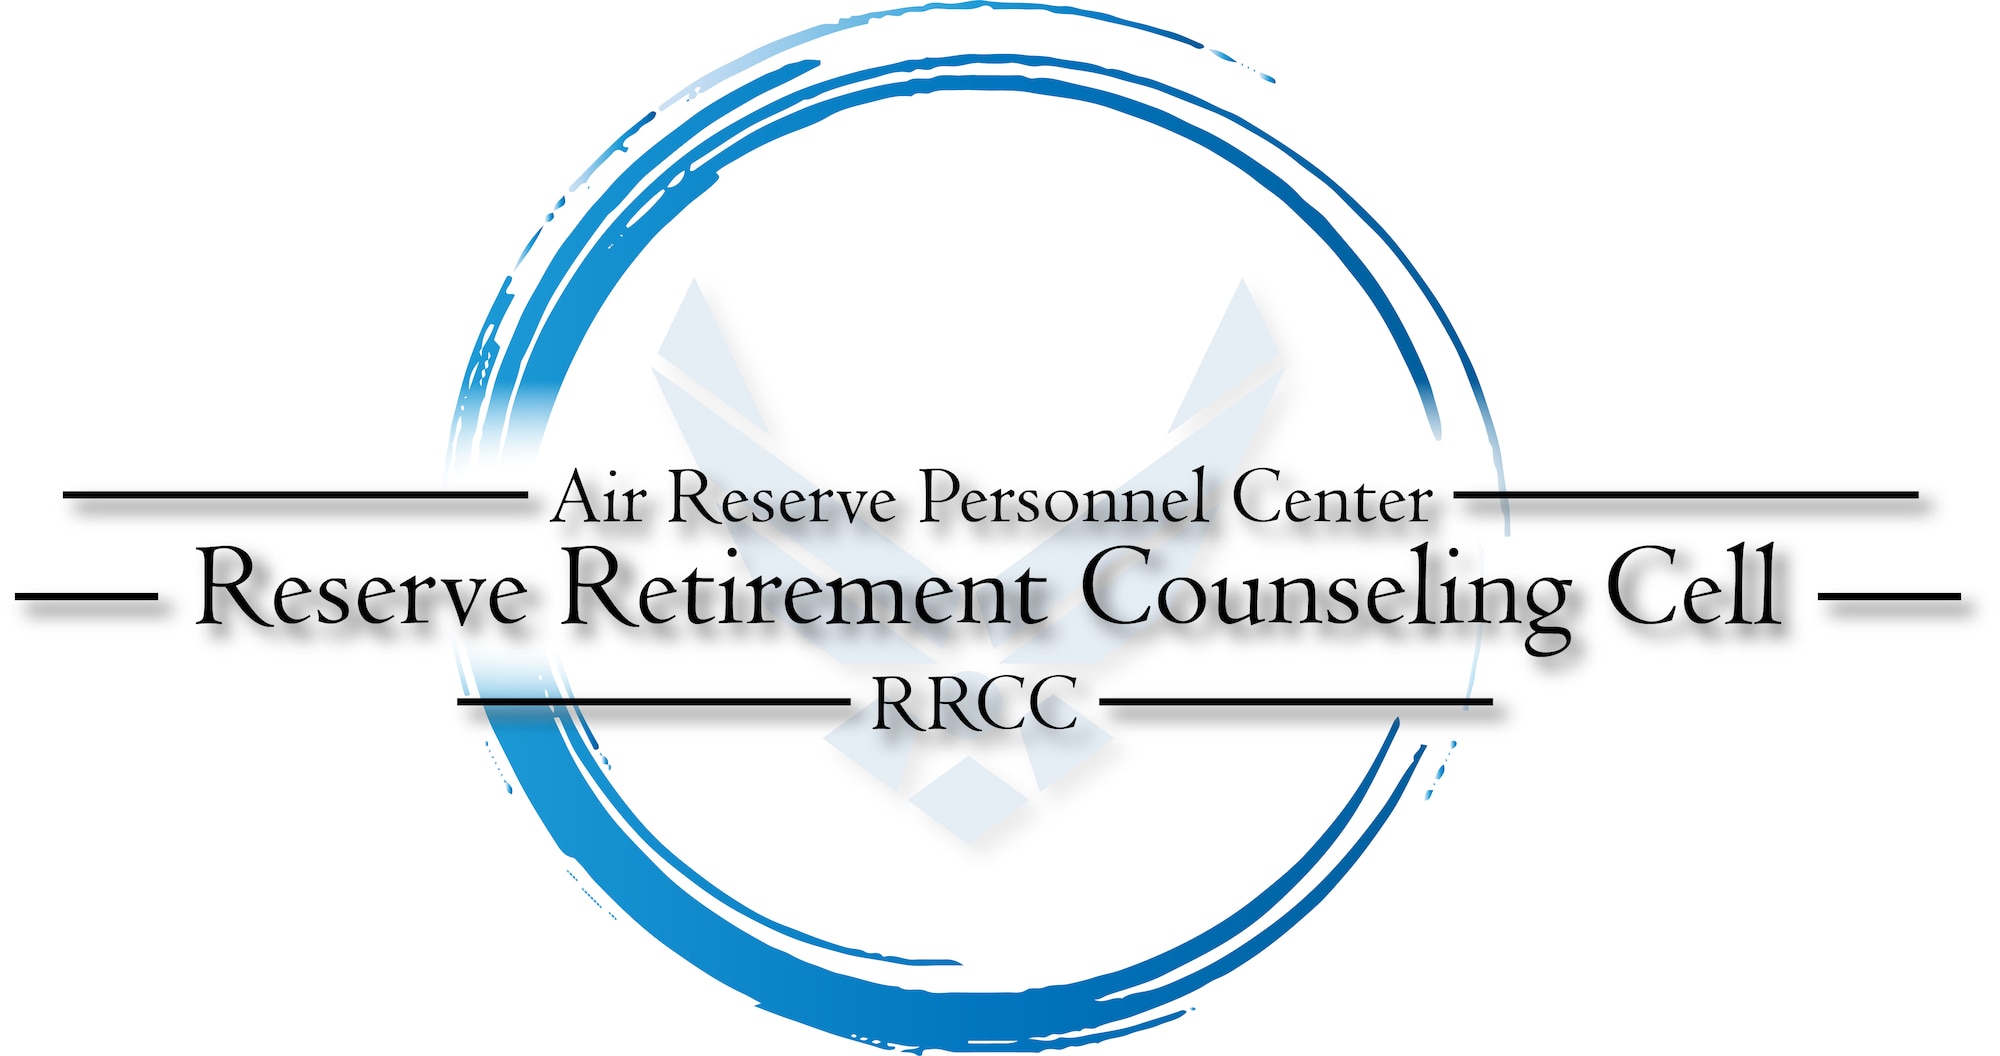 Reserve Retirement Counseling Cell